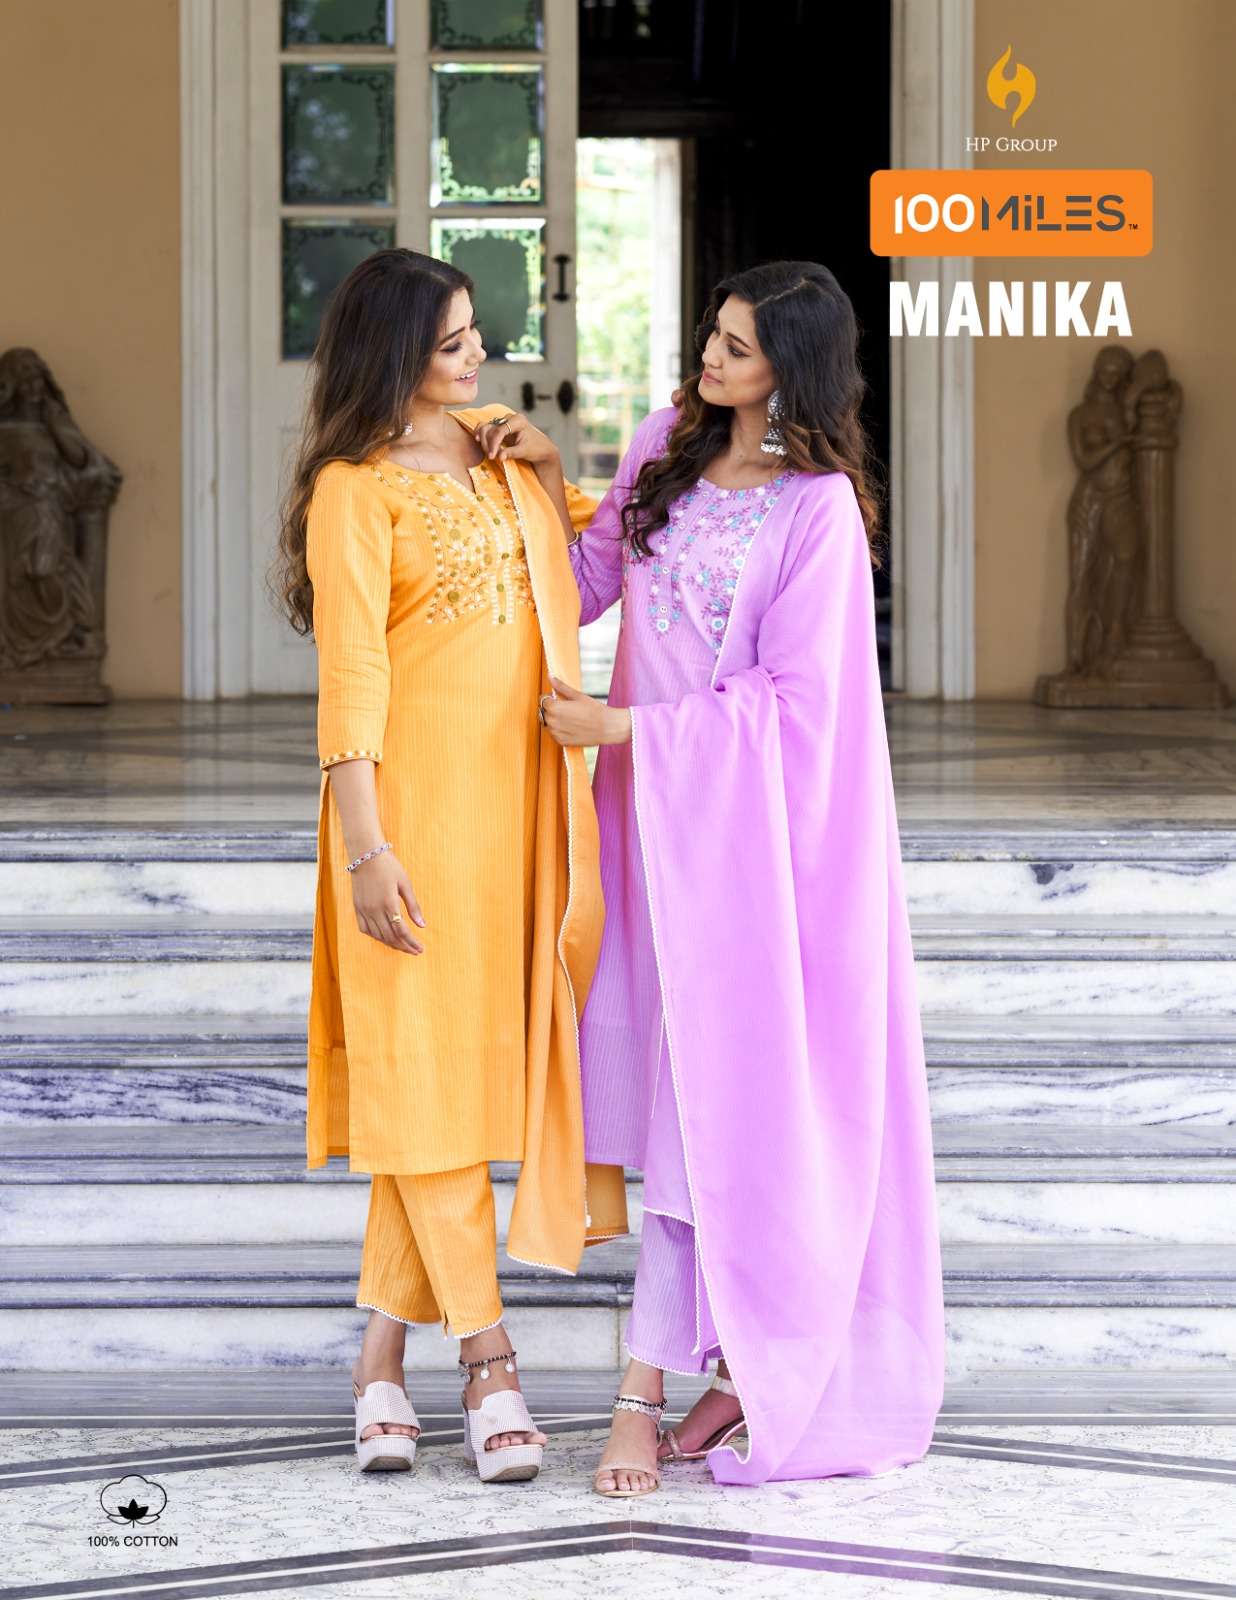 100 MILES MANIKA DESIGNER COTTON EMBROIDERY WORK KURTI WITH PANT AND DUPATTA READYMADE SET IN BEST WHOLESALE RATE 